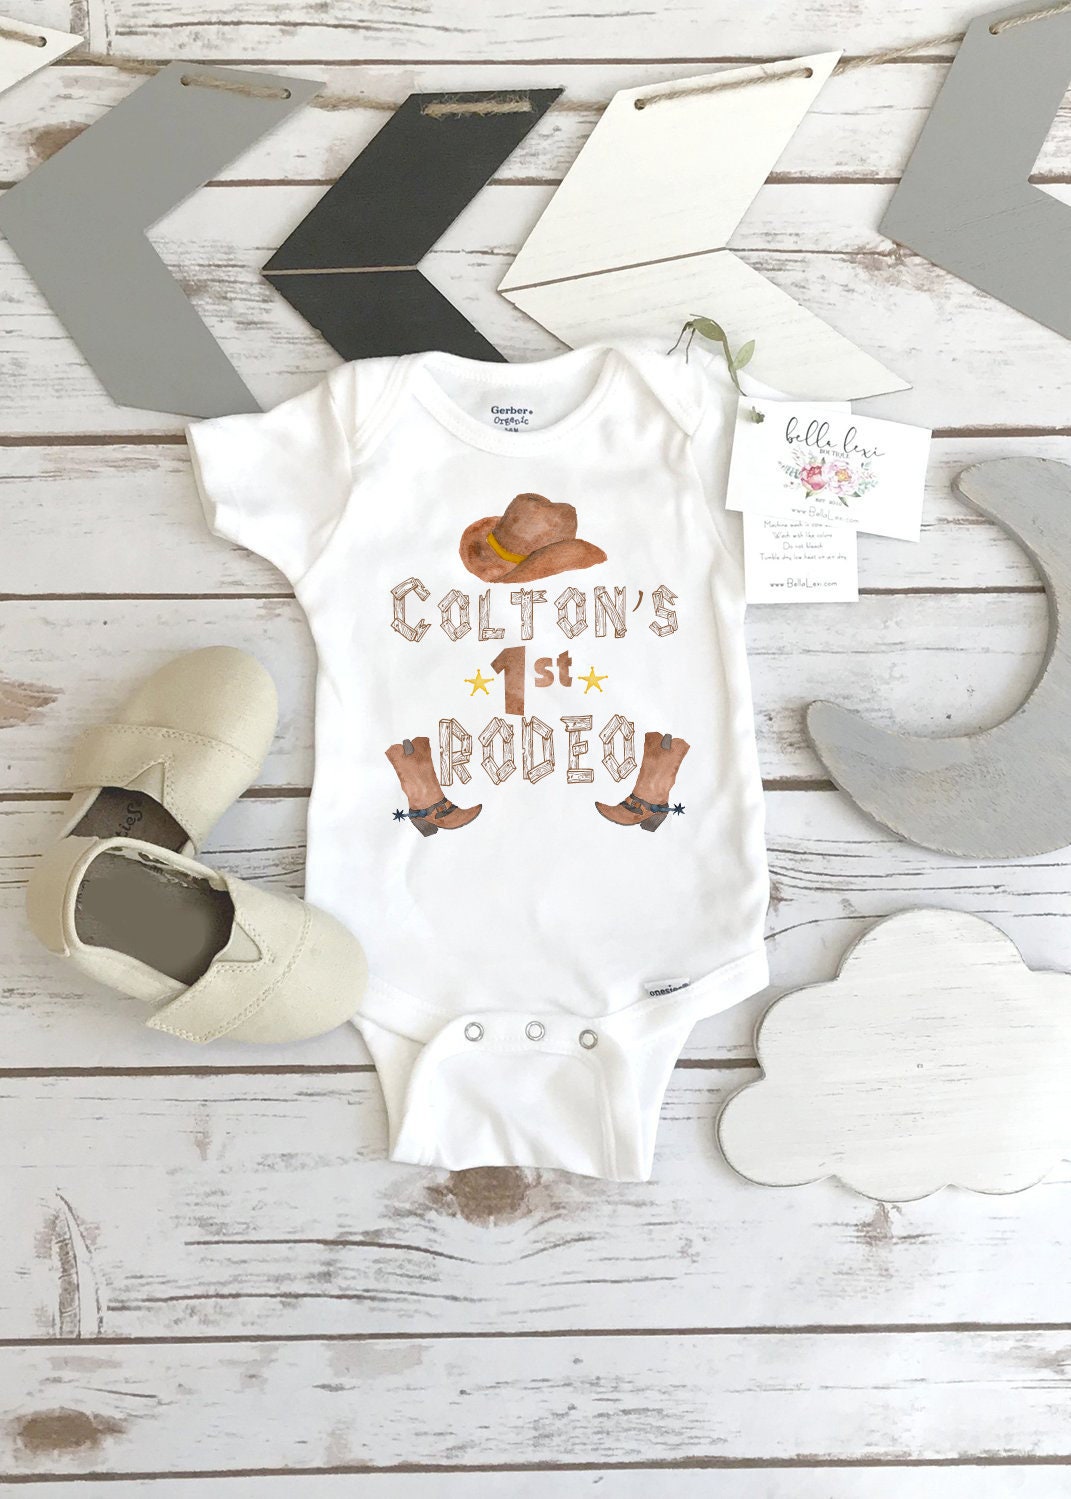 Cowboy Birthday, First Rodeo, Country Baby, Cowboy Party, Rodeo shirt, Baby Shower Gift, Country Boy Birthday, Country Baby Gift, Rodeo baby